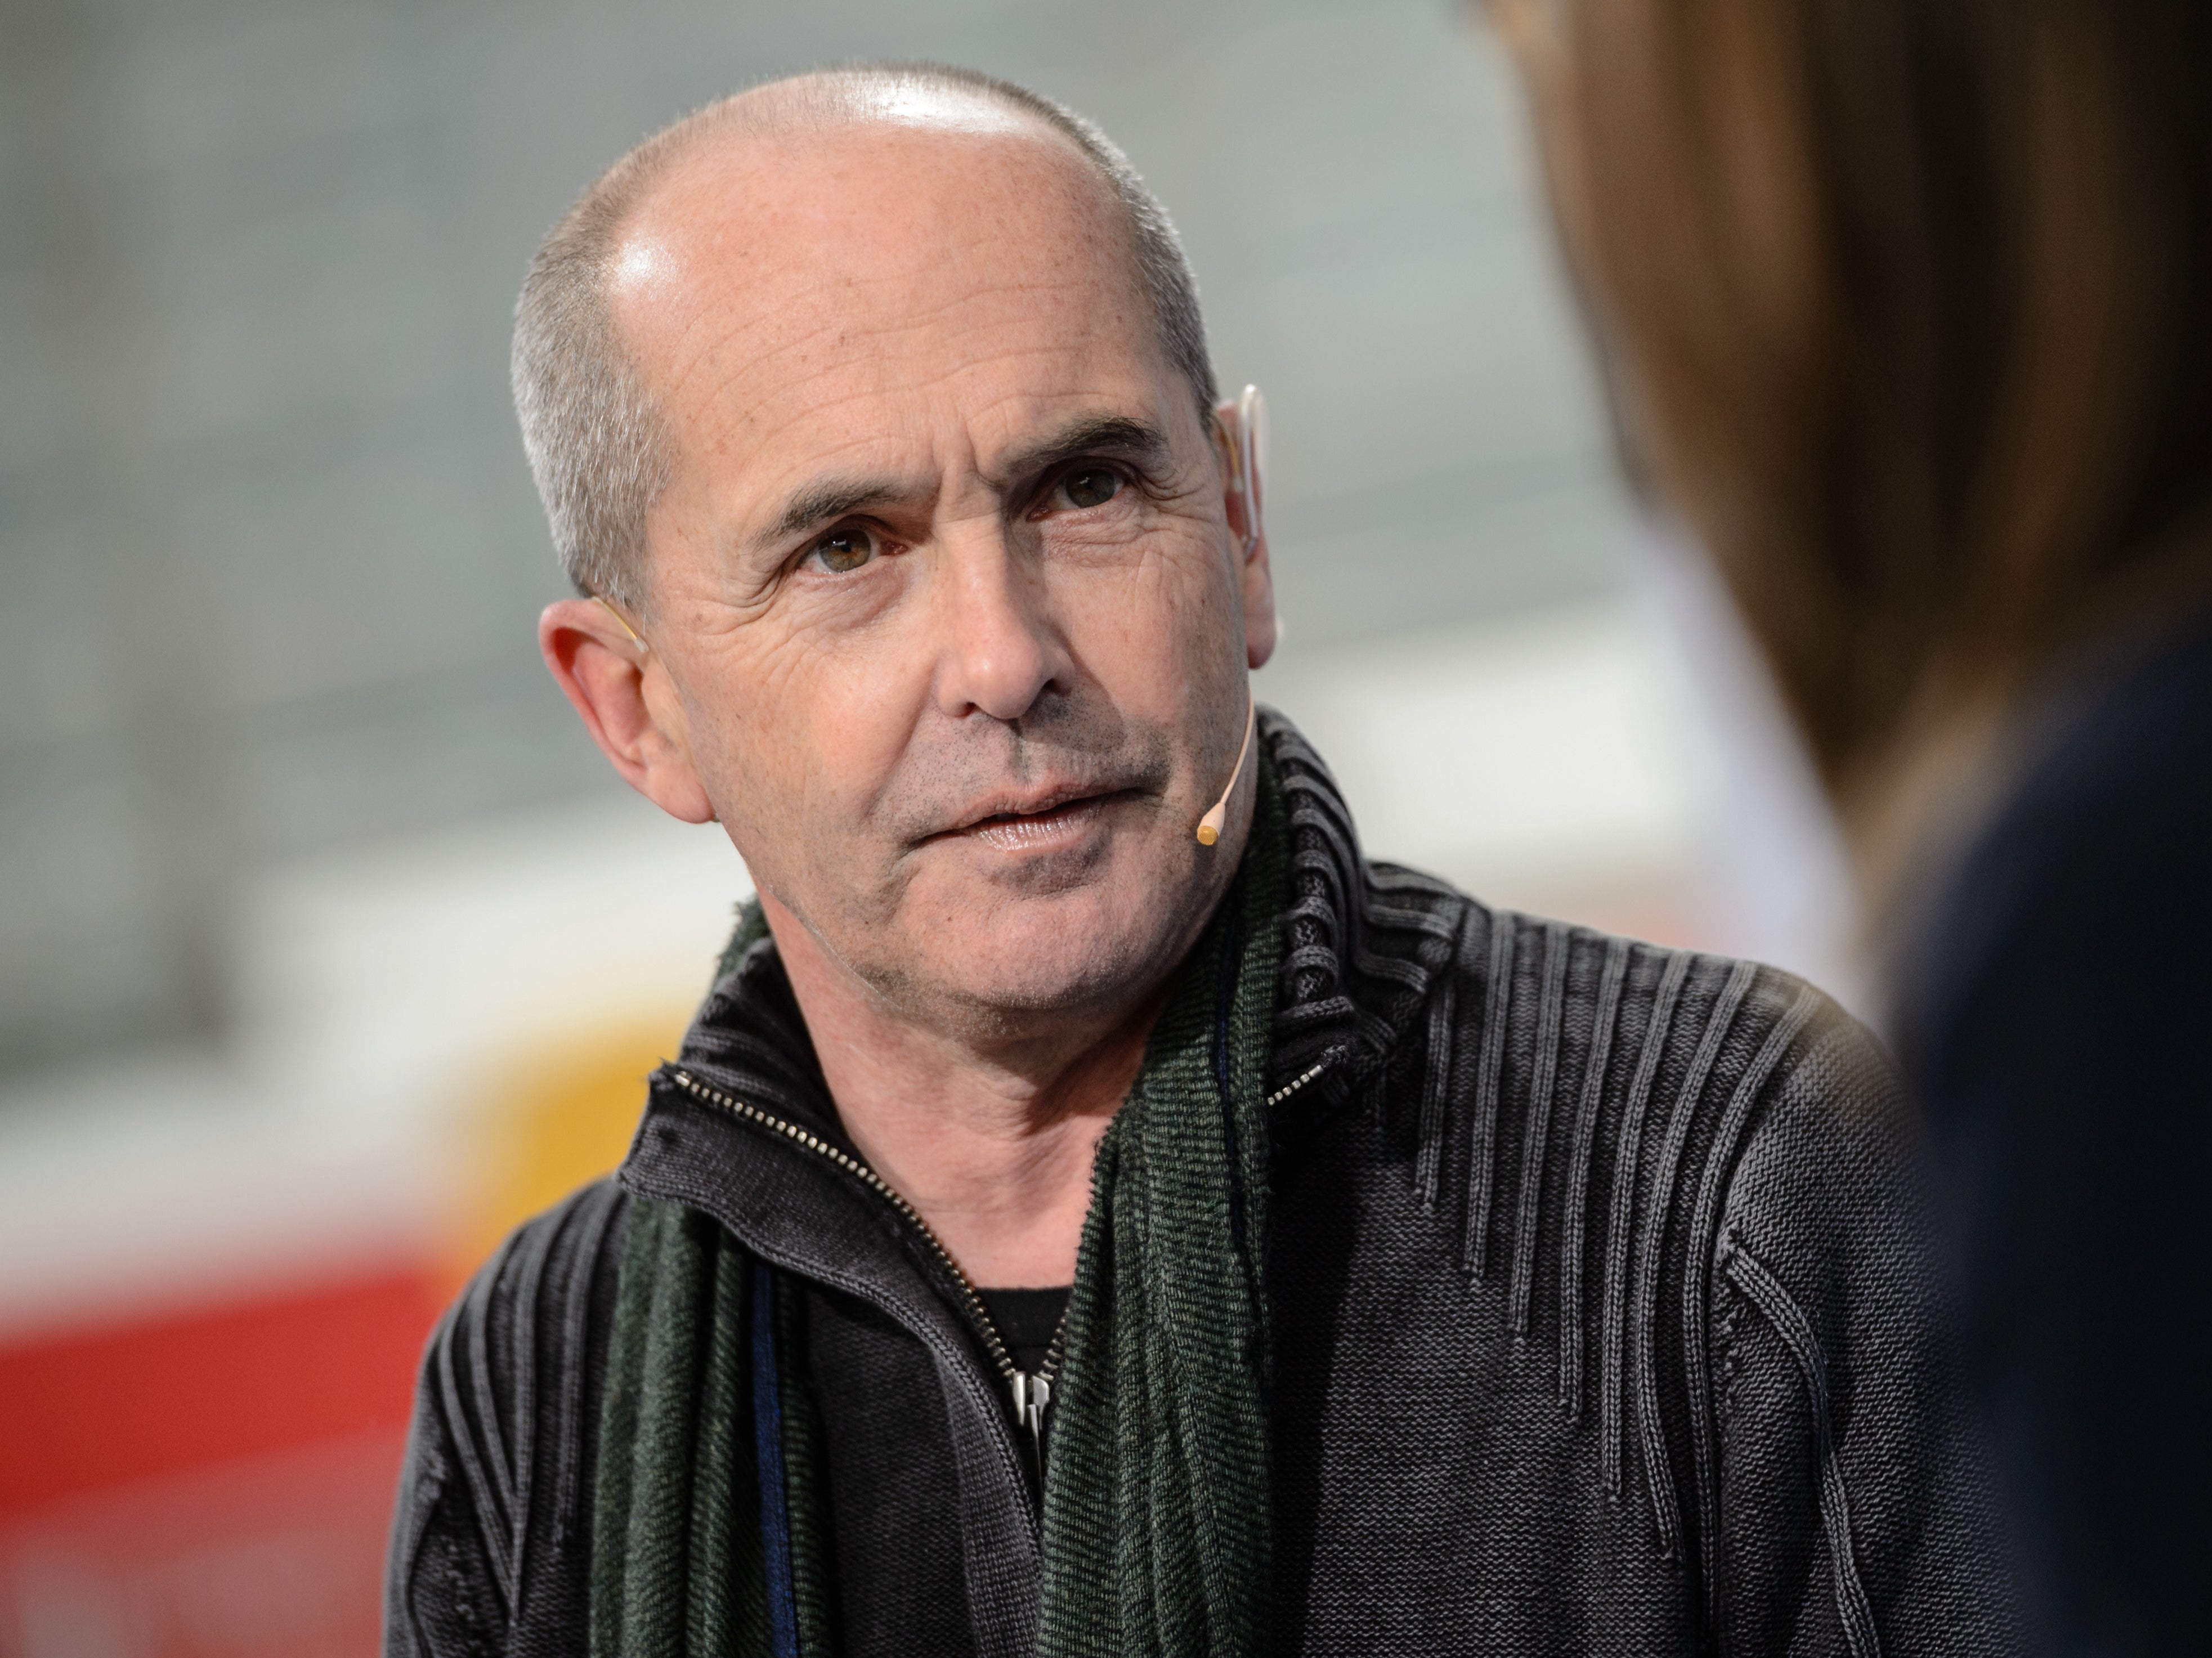 American author Don Winslow